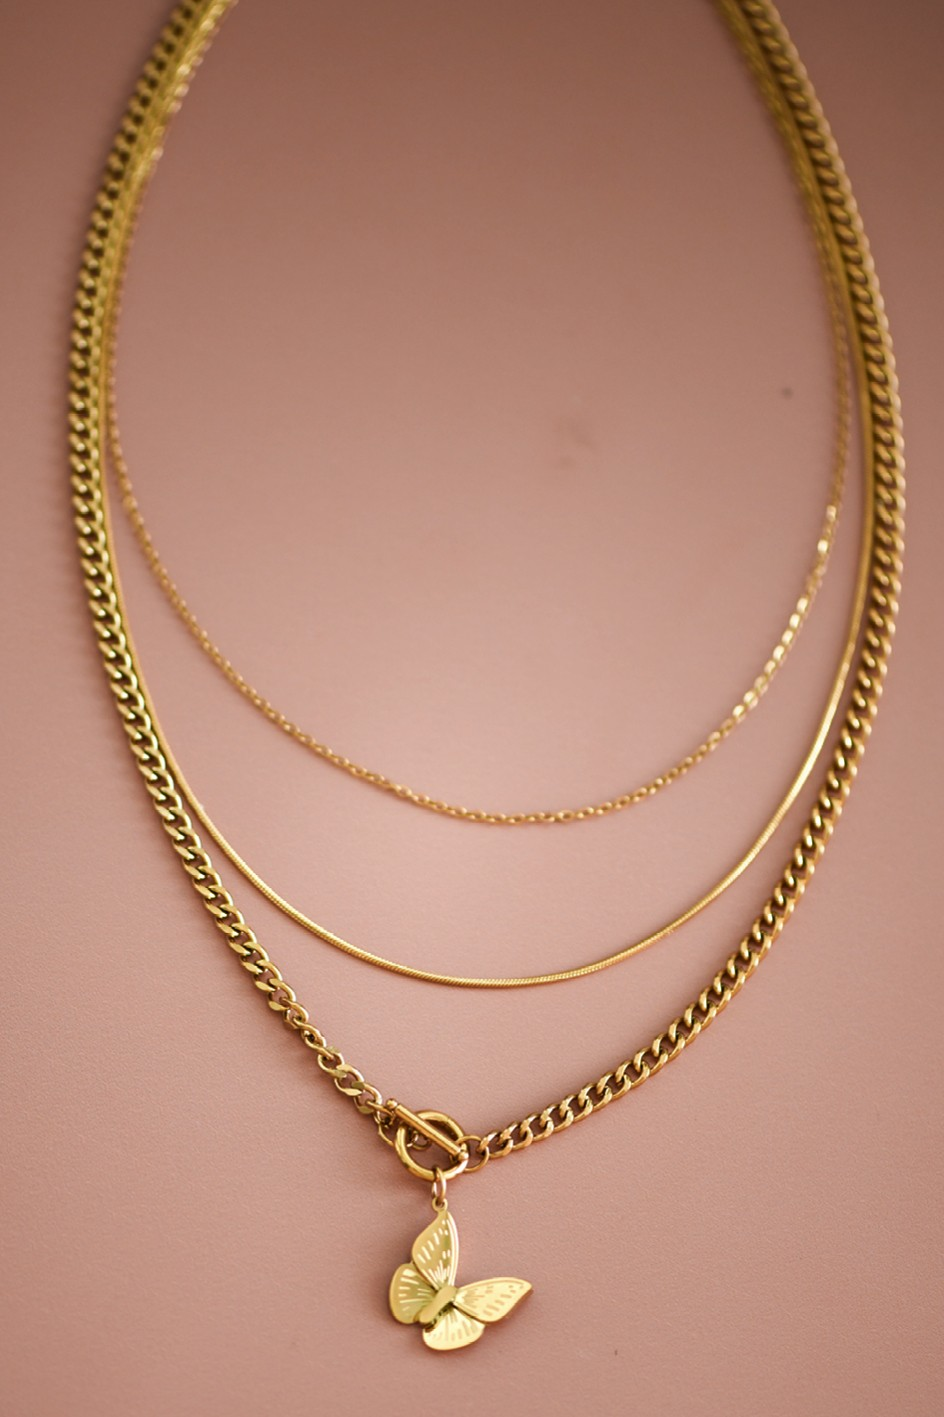 18K Gold Non-Tarnish Stainless Steel Necklace